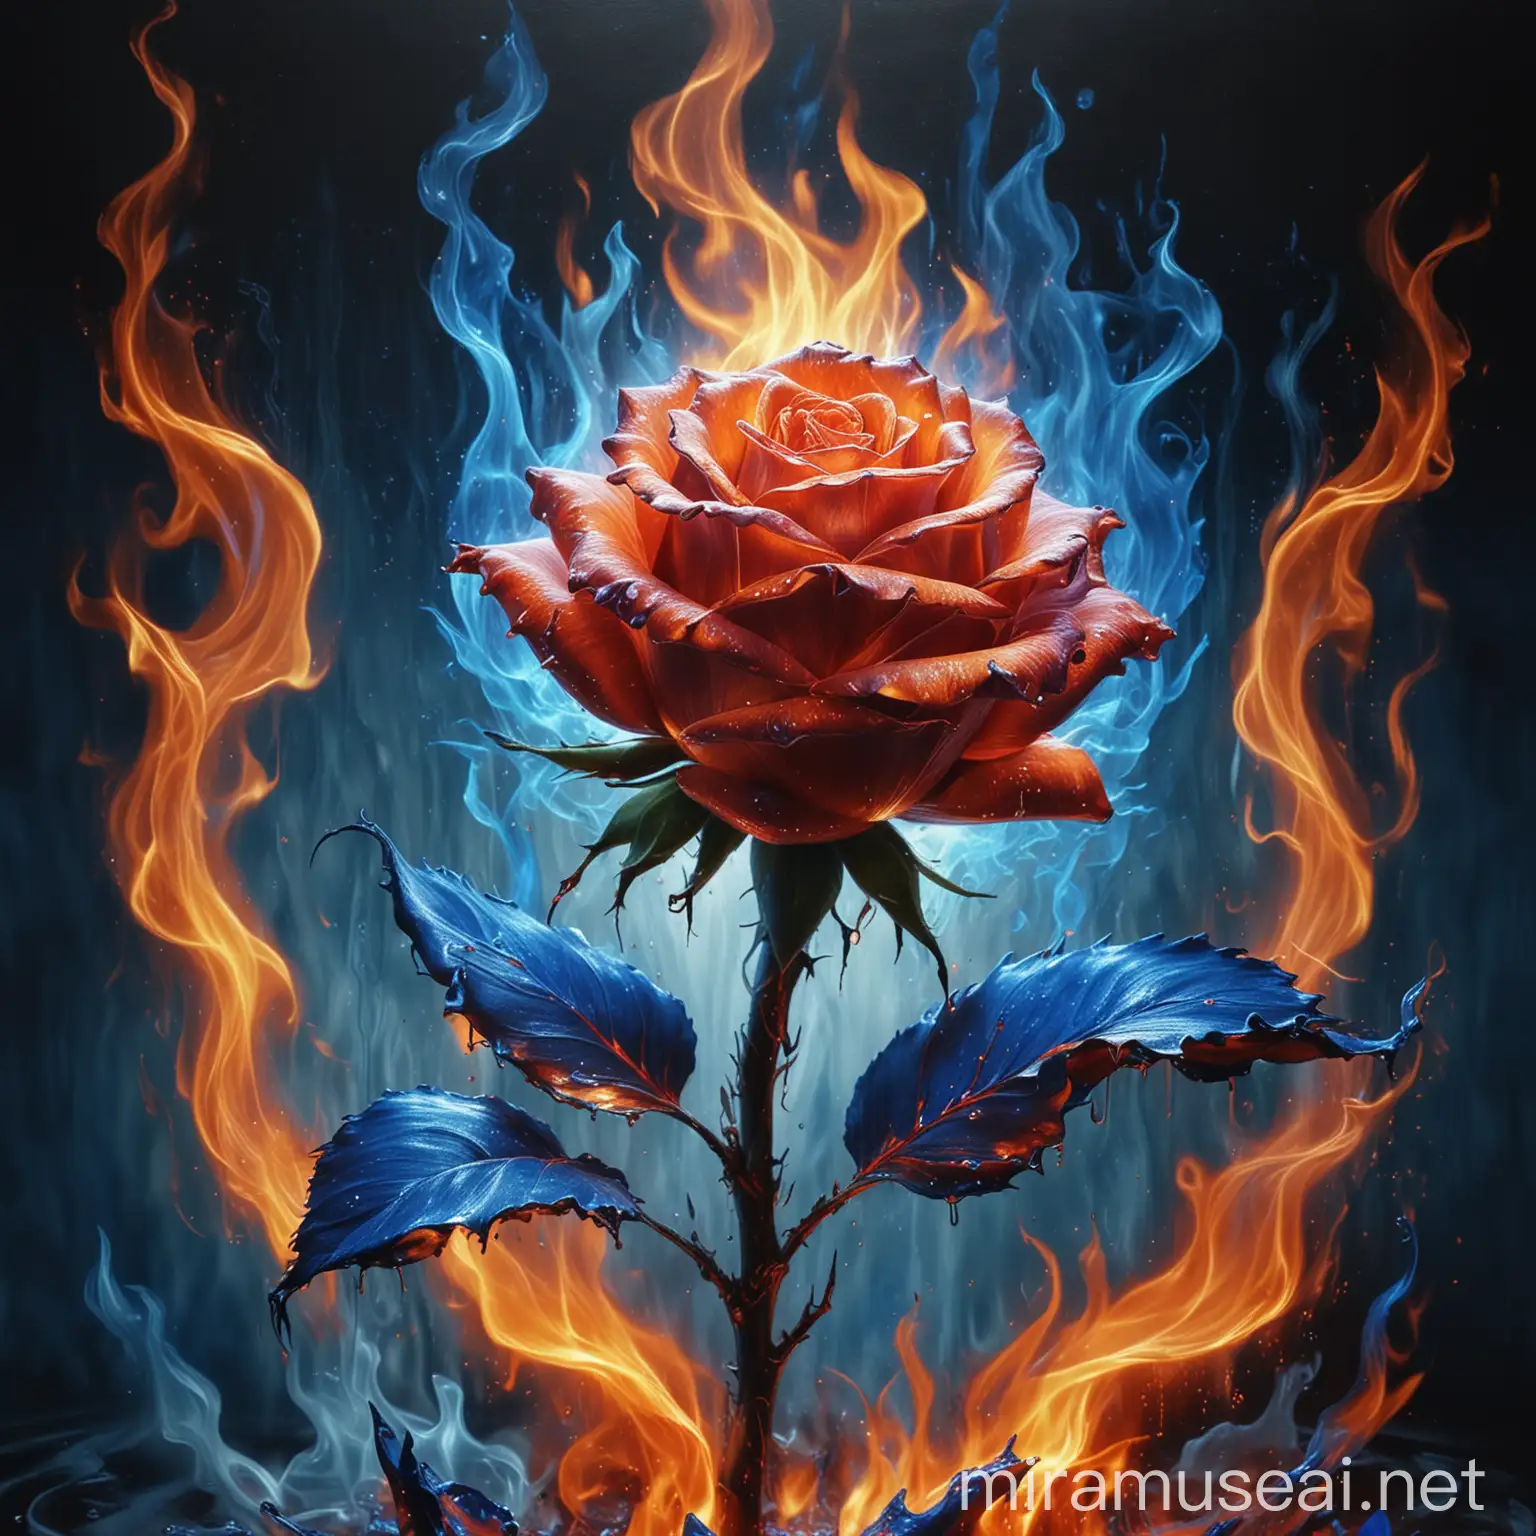 Burning Rose with Blue Flames in Metallic Environment